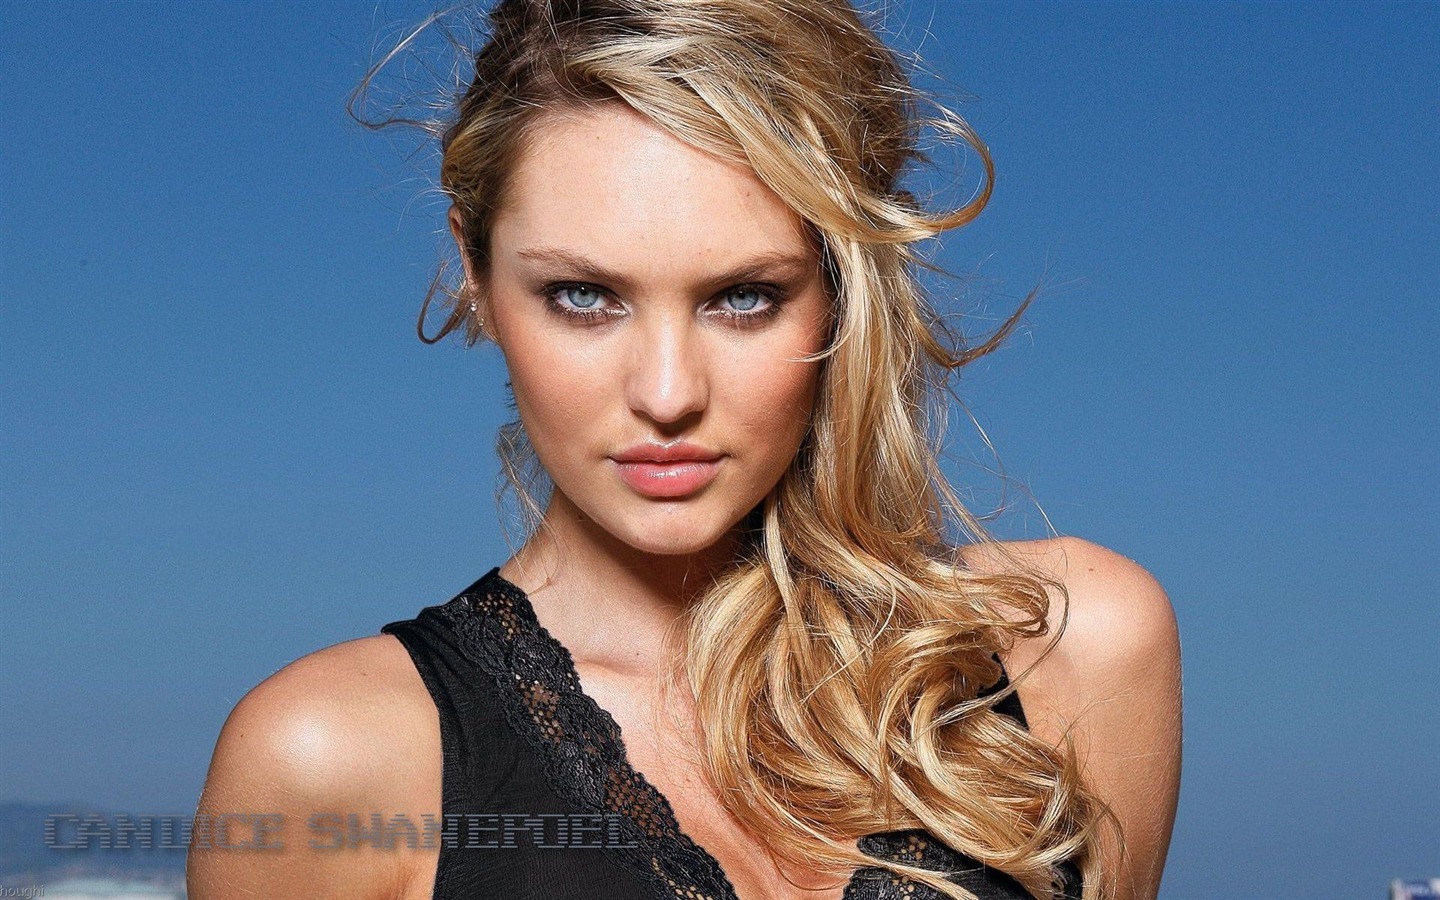 Candice Swanepoel #028 - 1440x900 Wallpapers Pictures Photos Images